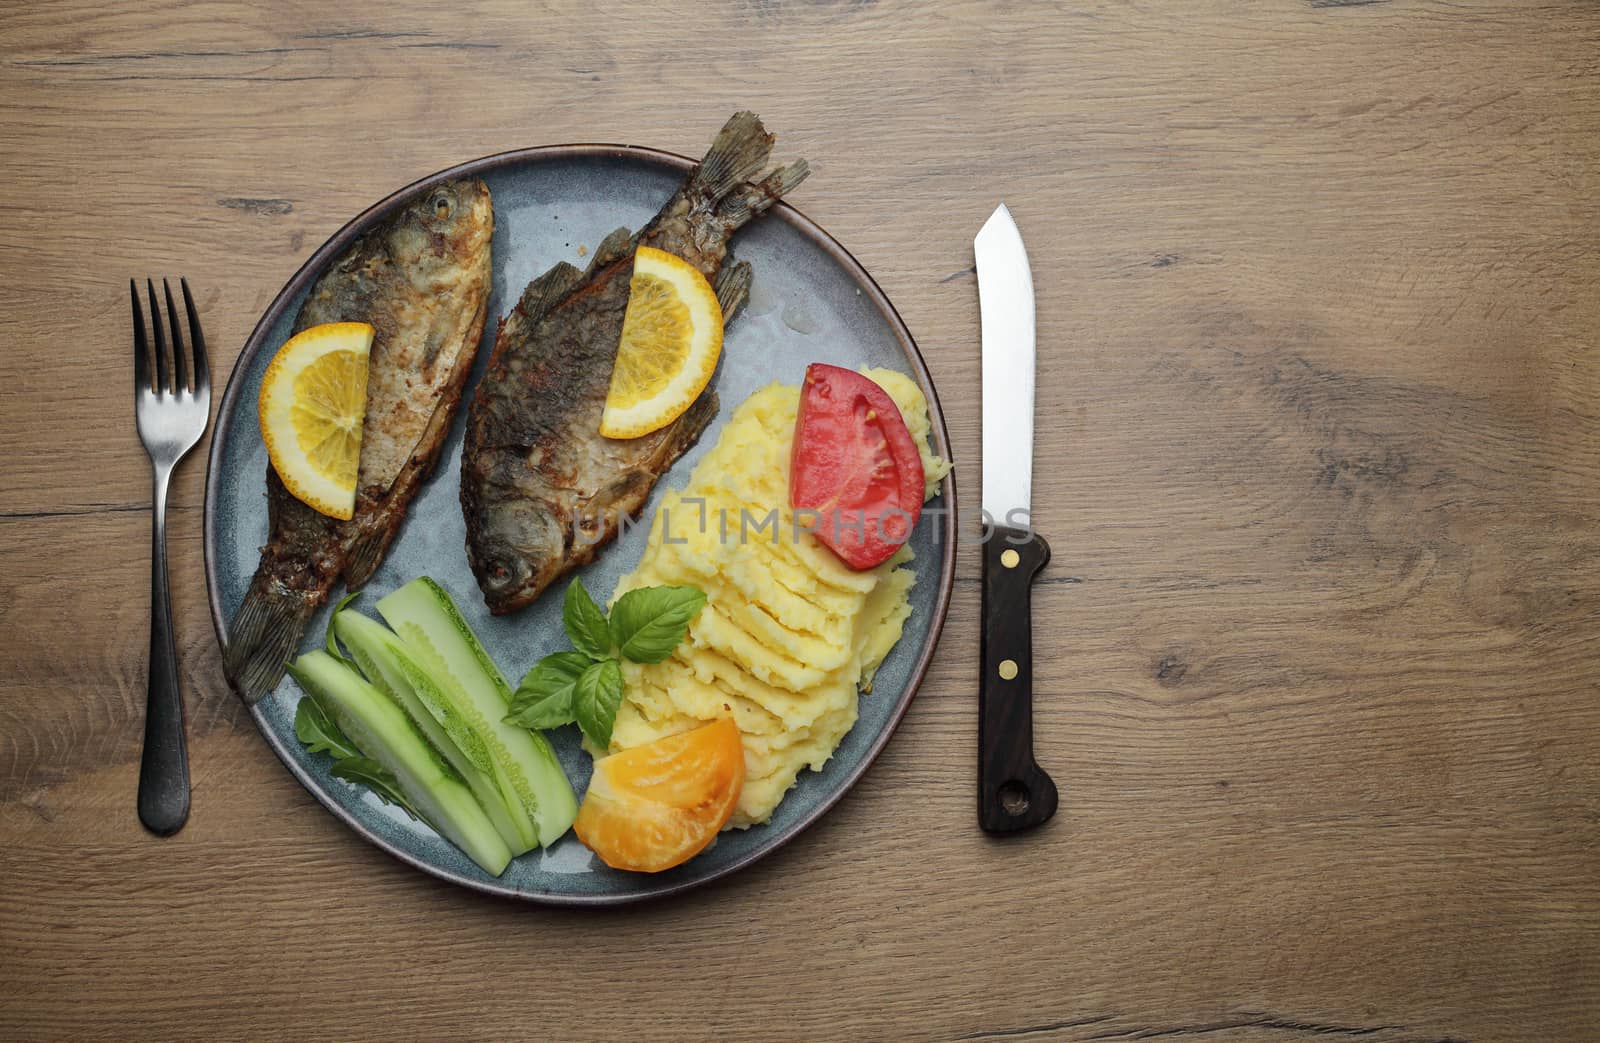 Fried fish and vegetables on a plate. On a wooden table by selinsmo